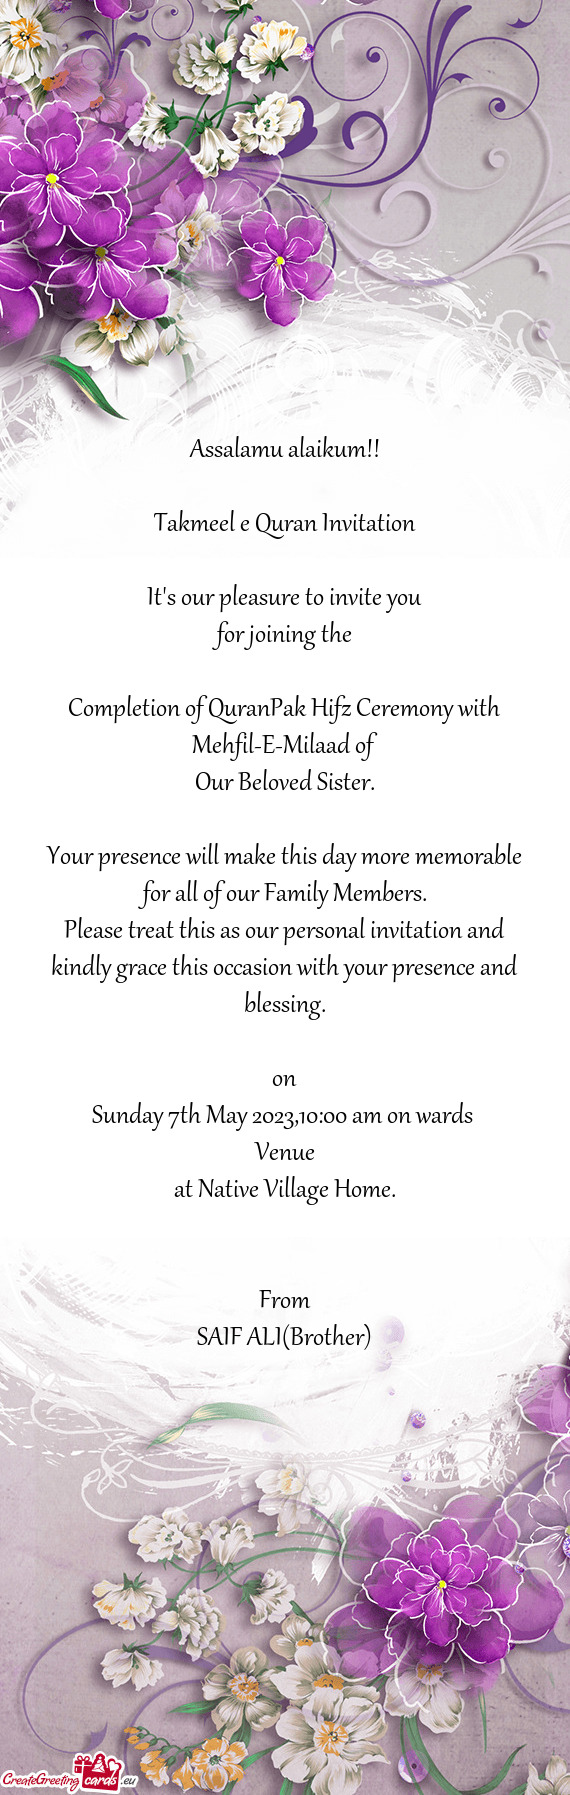 Completion of QuranPak Hifz Ceremony with Mehfil-E-Milaad of